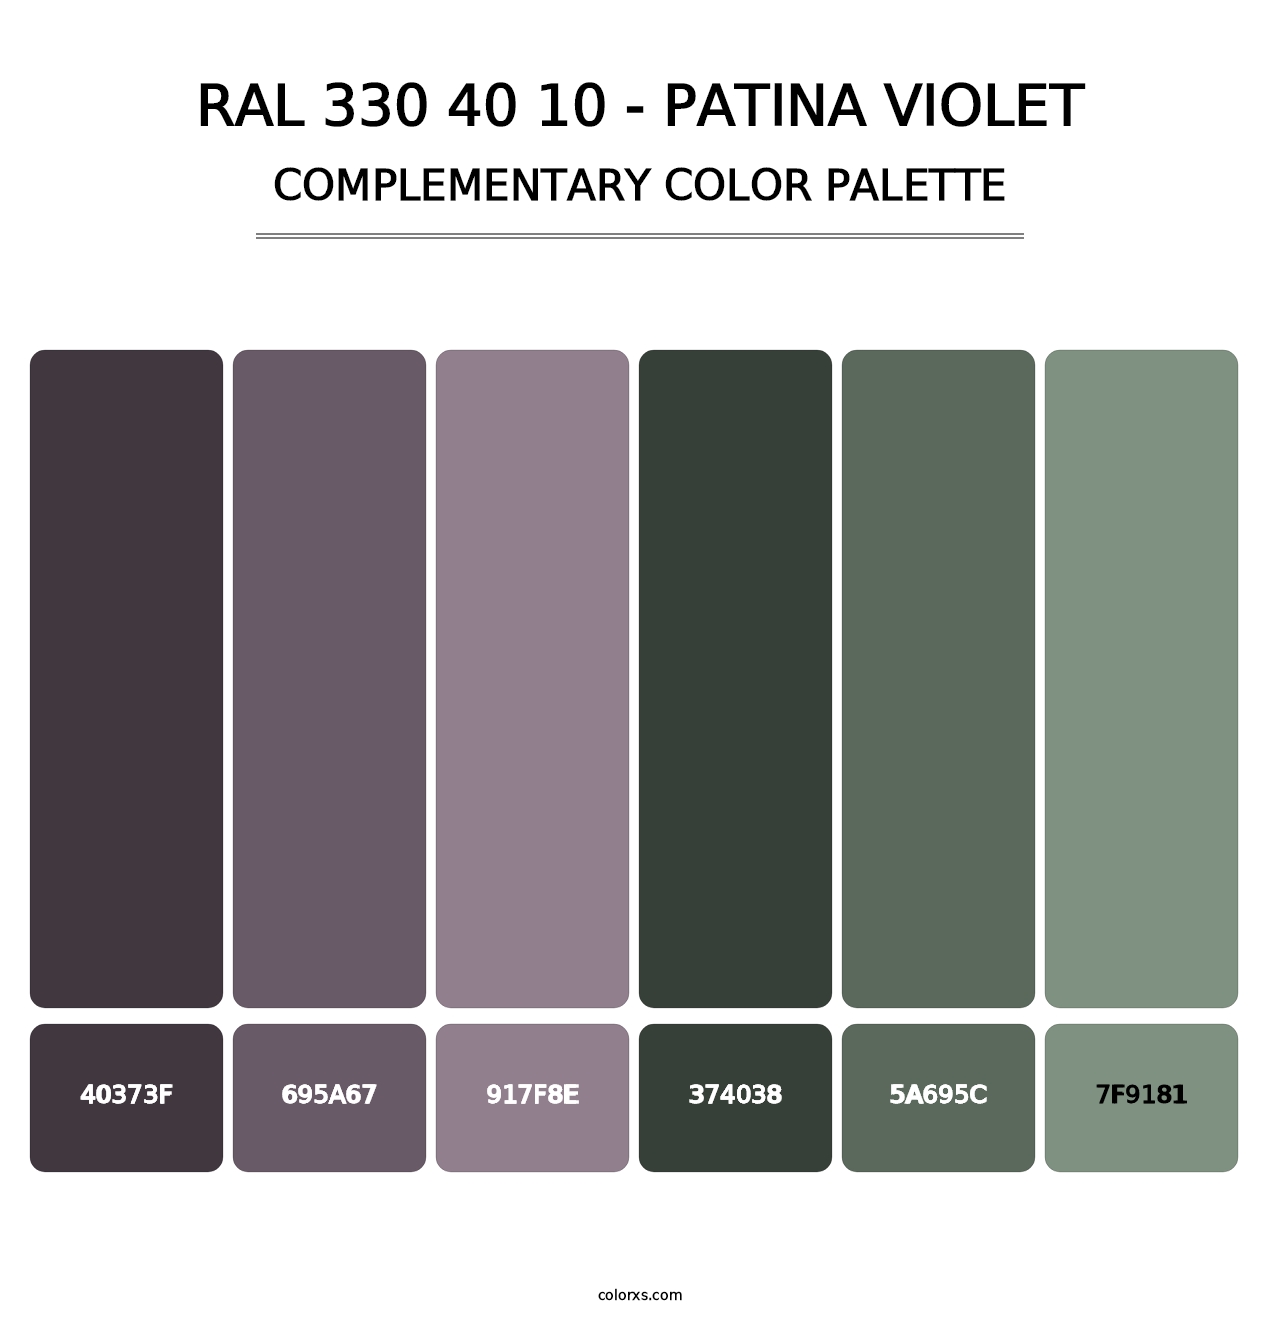 RAL 330 40 10 - Patina Violet - Complementary Color Palette